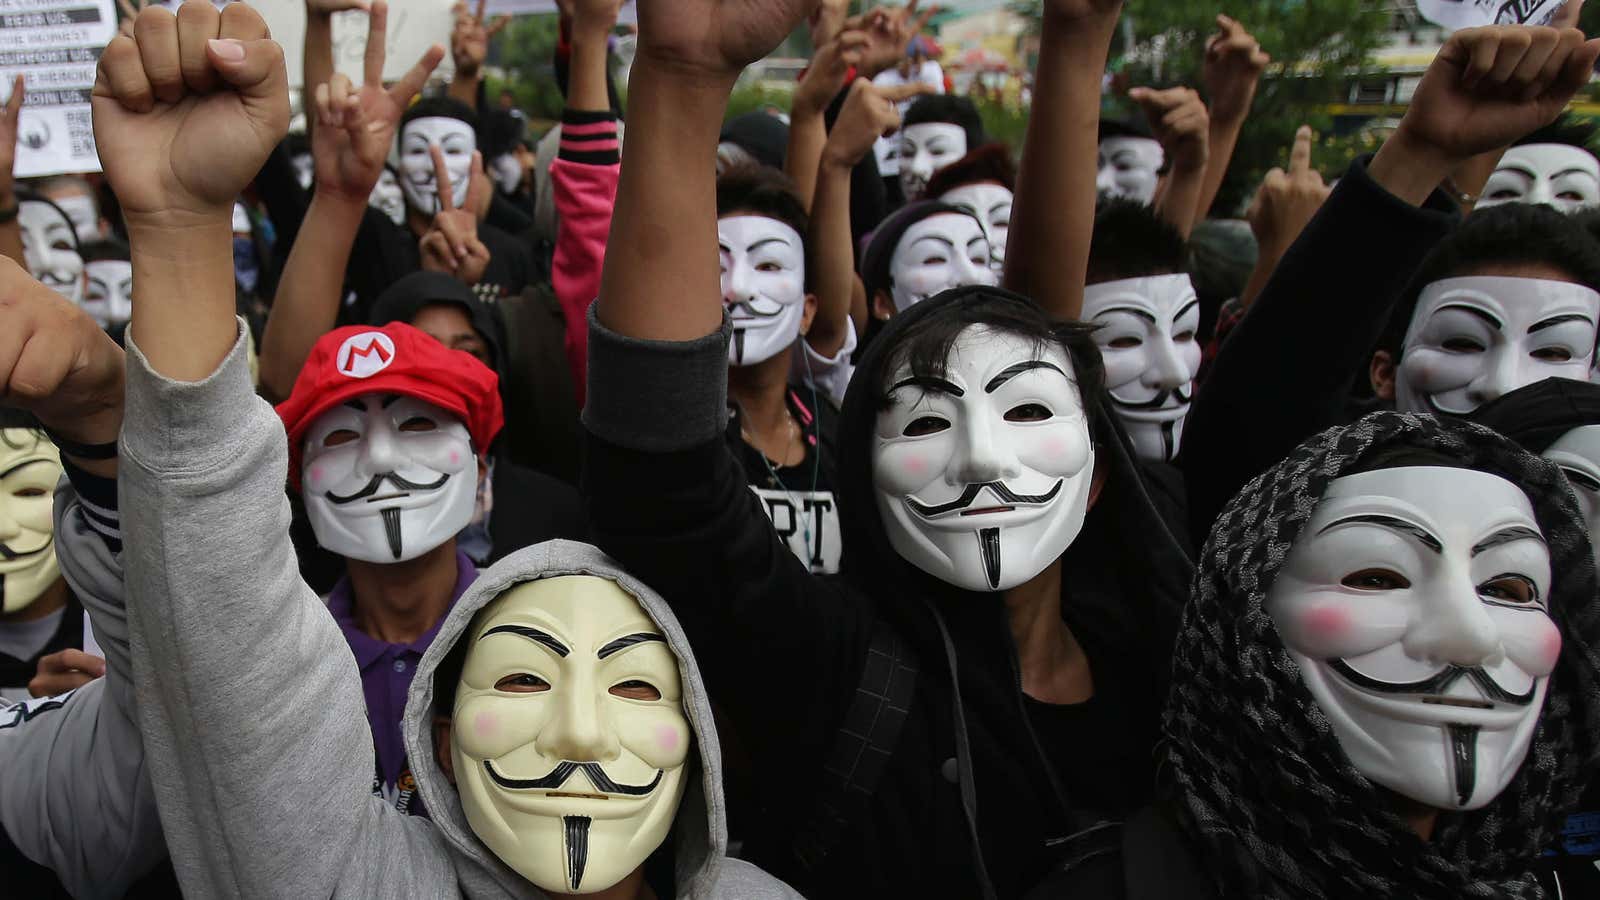 Anonymous may be able to intercept terrorist communications, but at a heavy price.